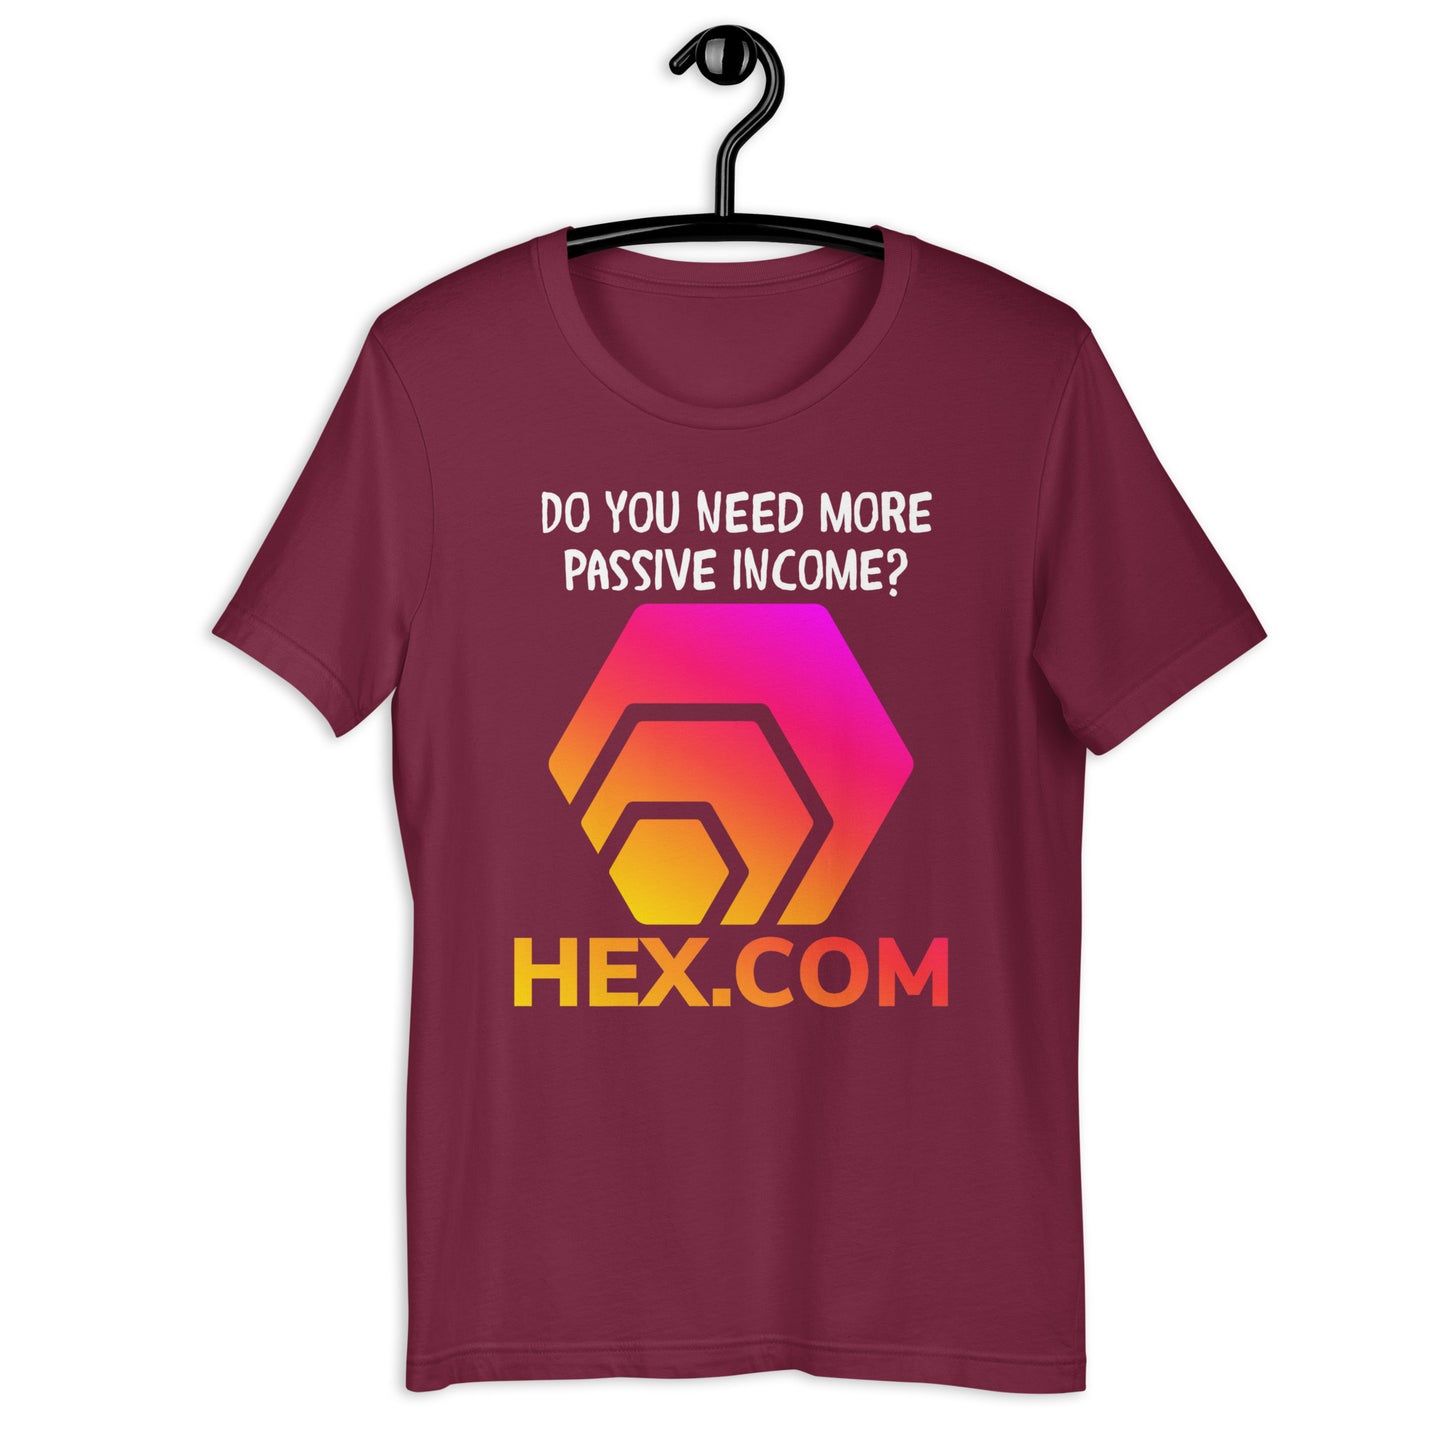 HEX - Do You Need More Passive Income? - Unisex T-Shirt